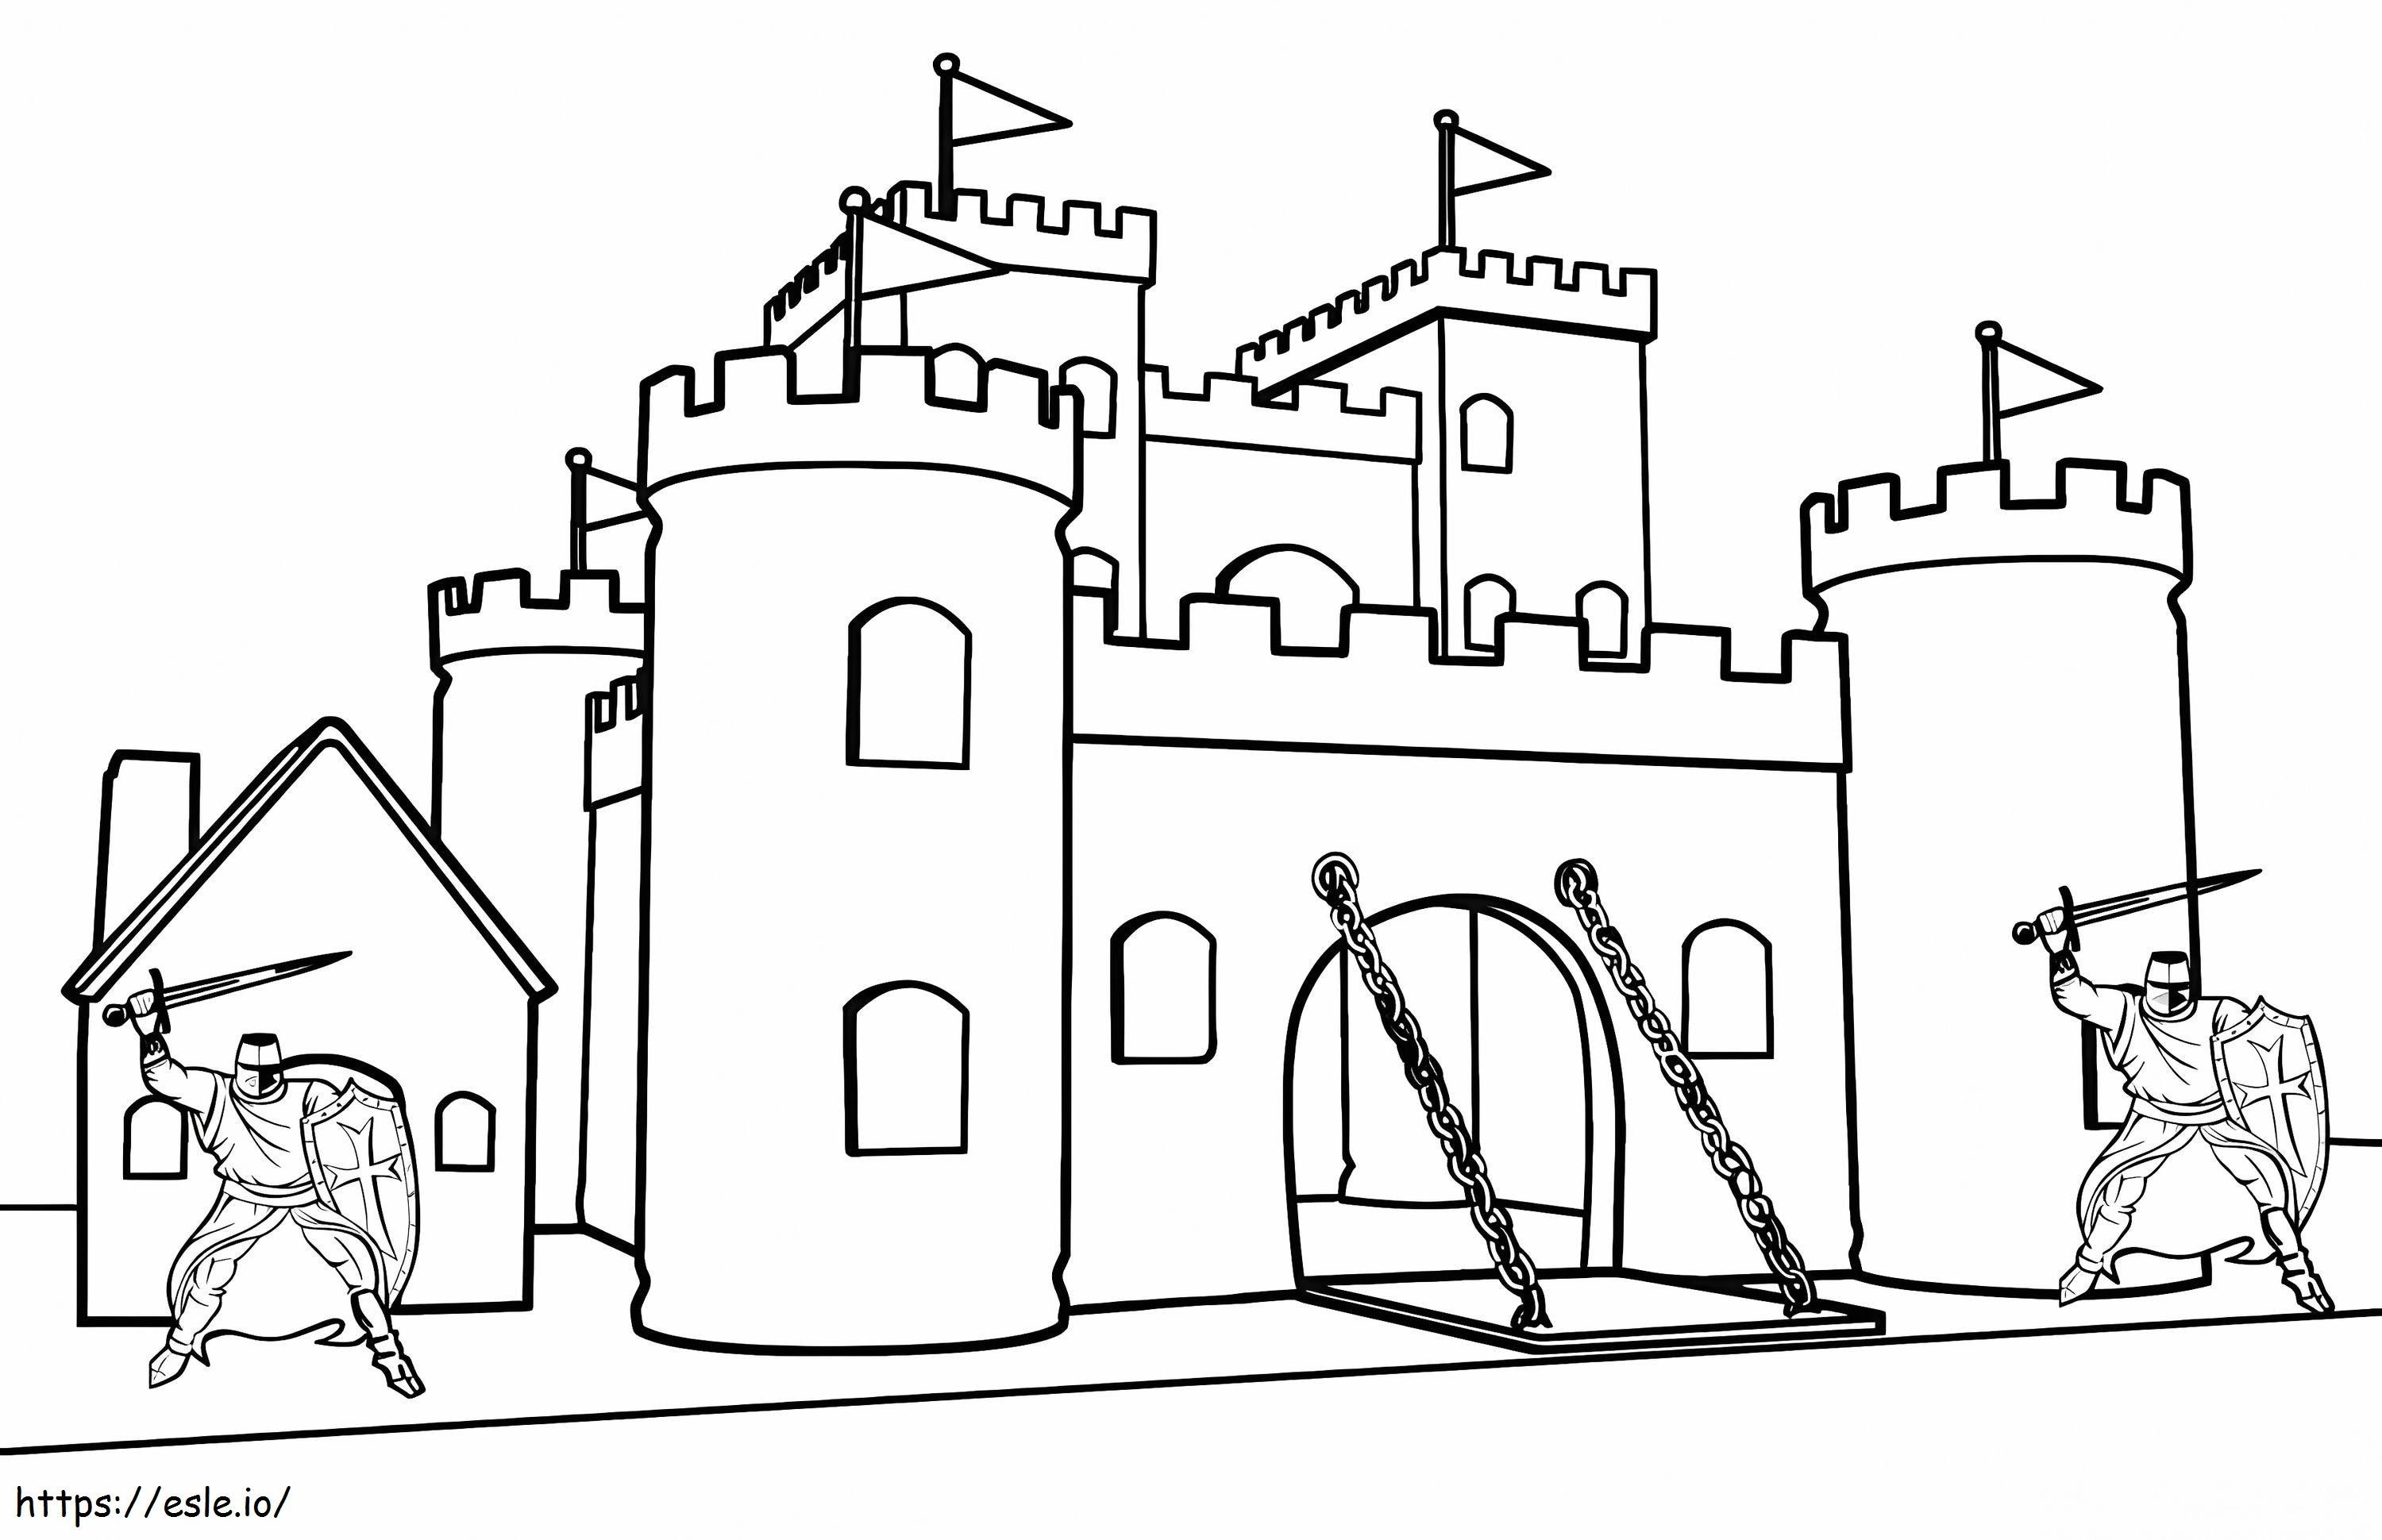 Two Knights In The Castle coloring page